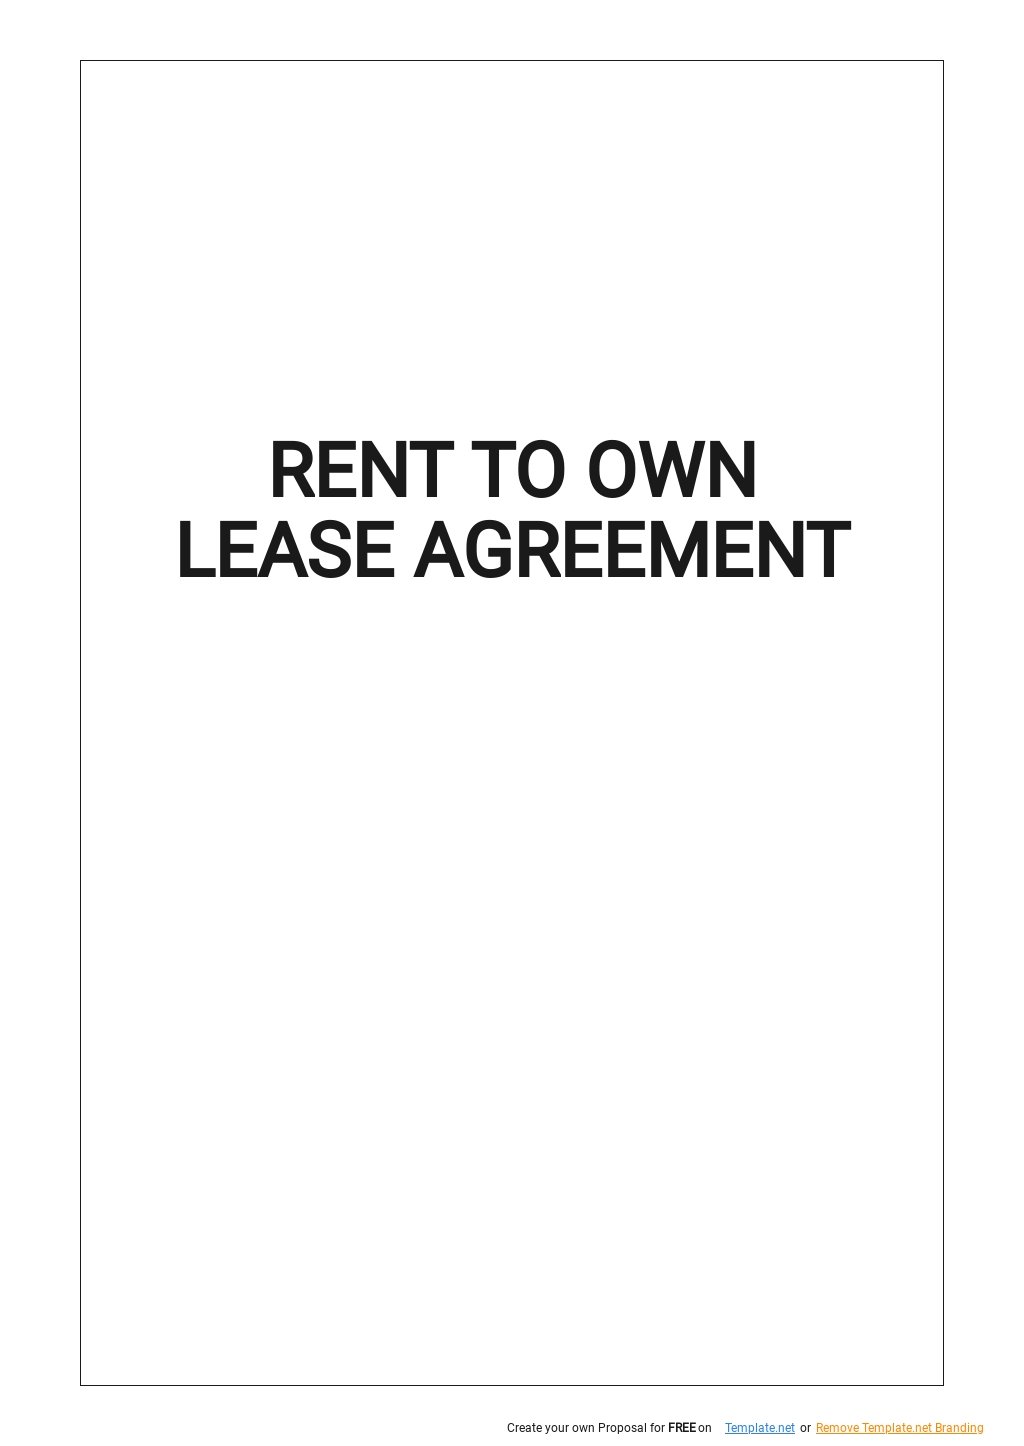 printable-ny-state-lease-form-printable-forms-free-online